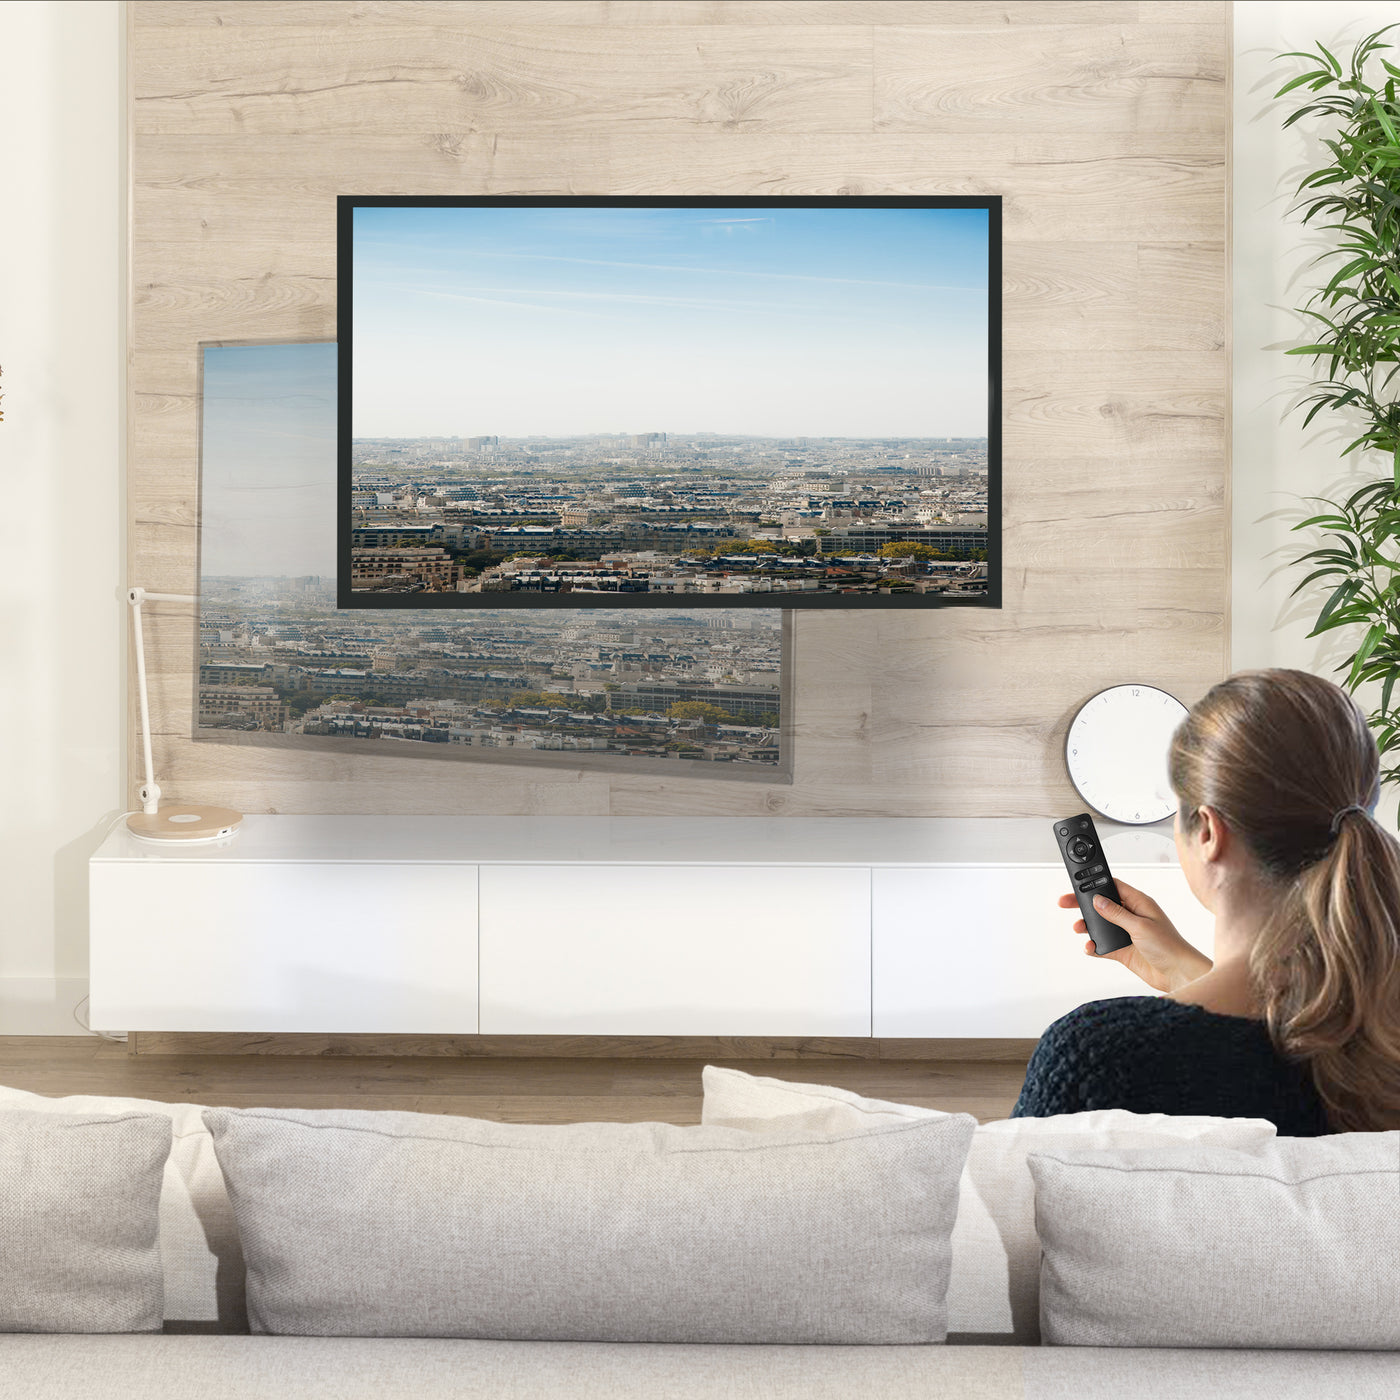 TV mounted in a living room setting adjusted to angle with remote control. 